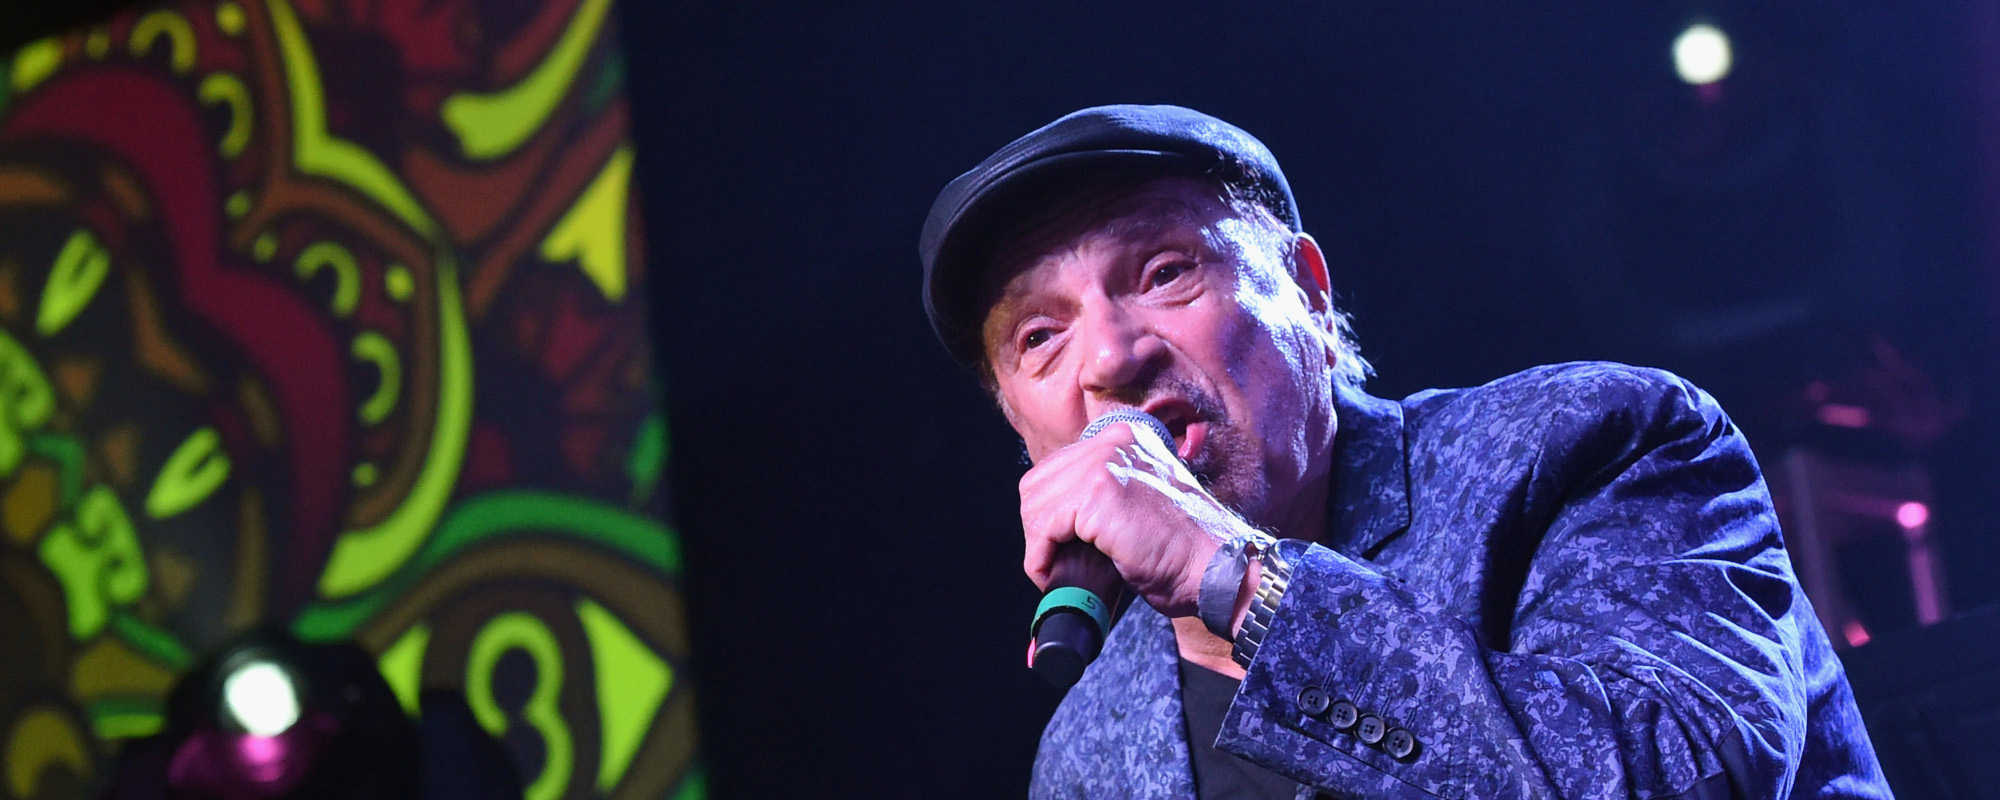 Review: A Rascal Returns and Felix Cavaliere Regales in His Roots